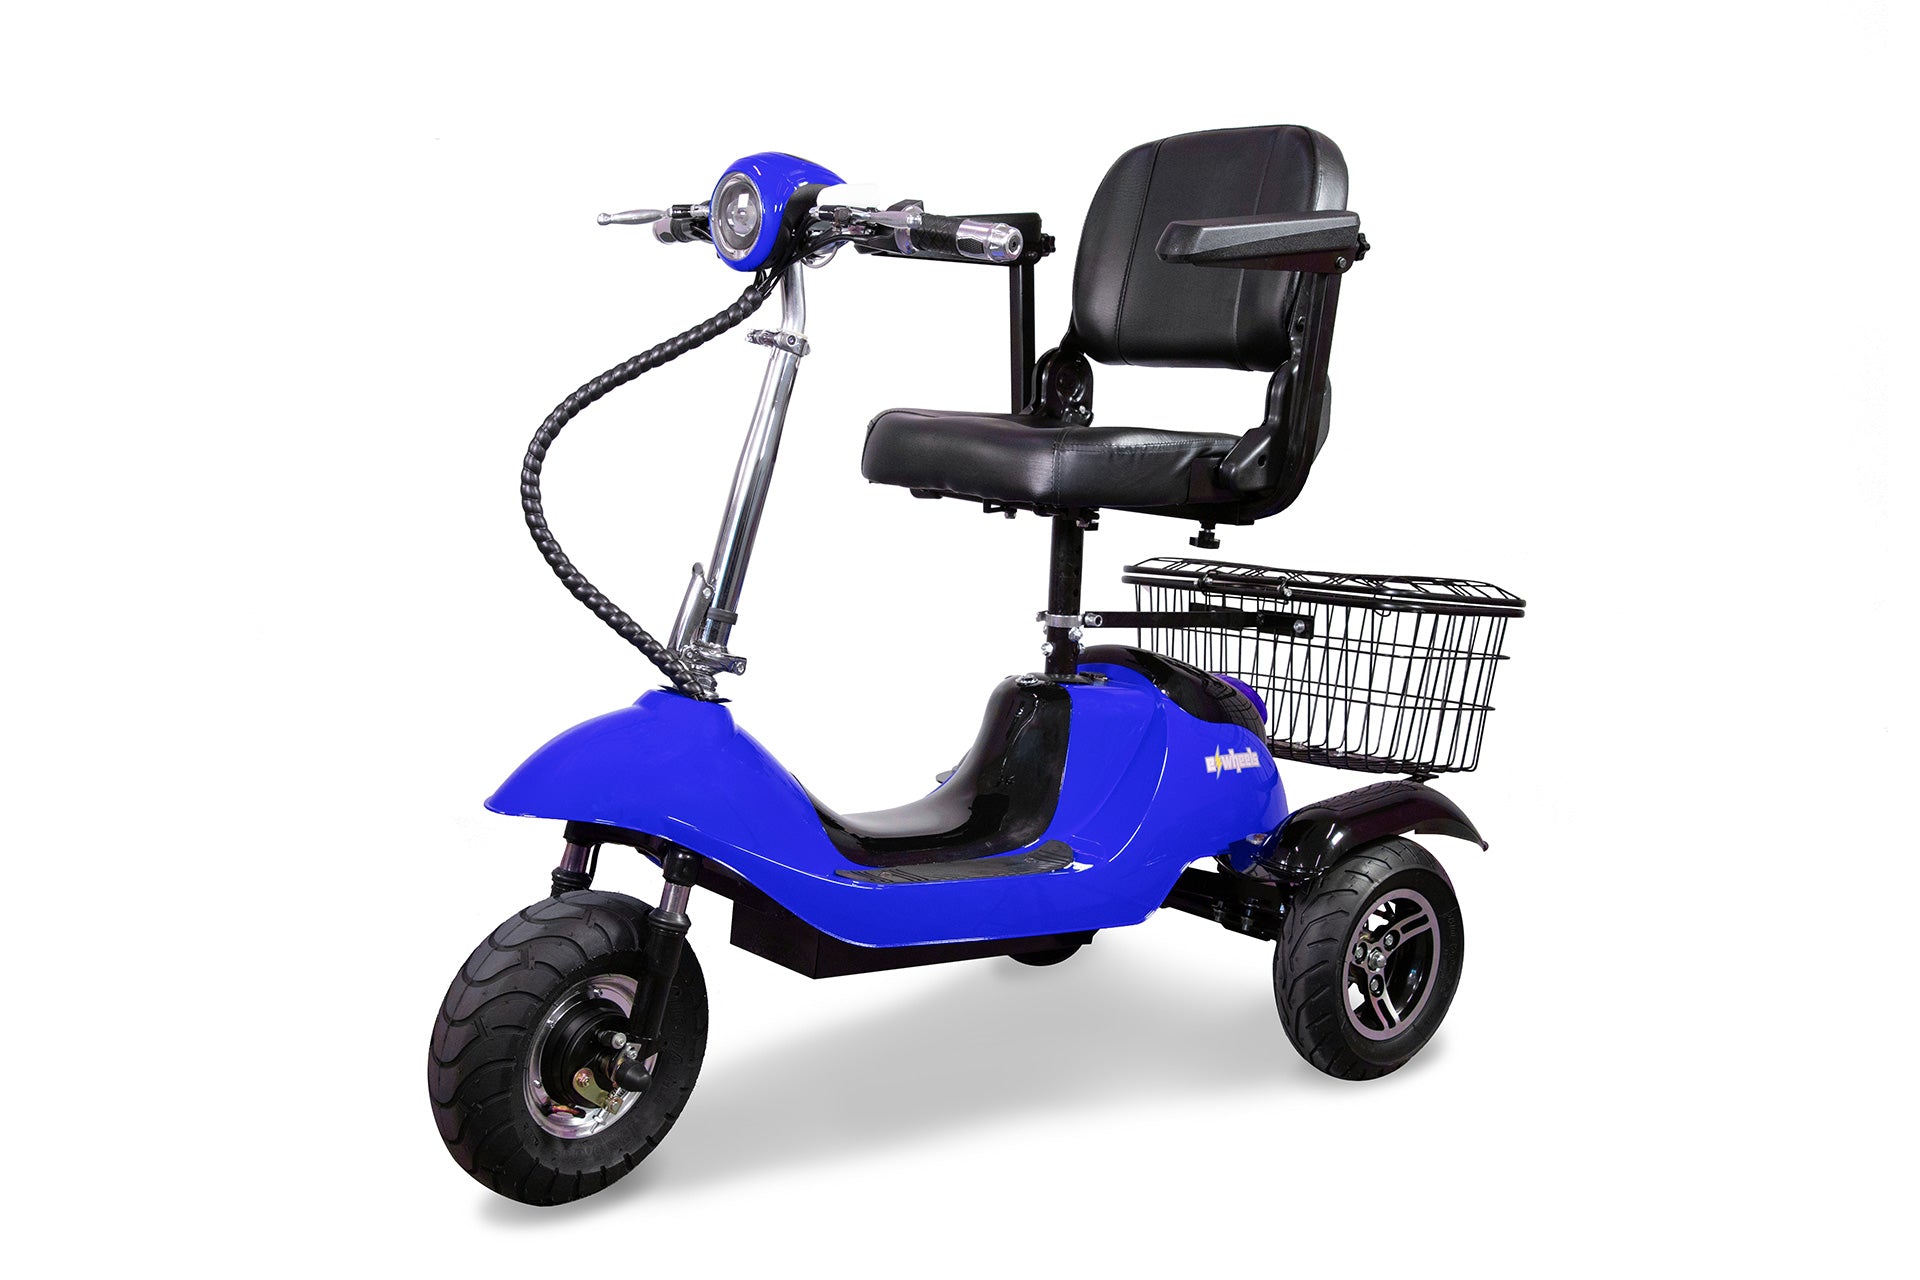 eWheels - 3 Wheels Recreational Mobility Scooter - 300lbs Weight Capacity - EW-20